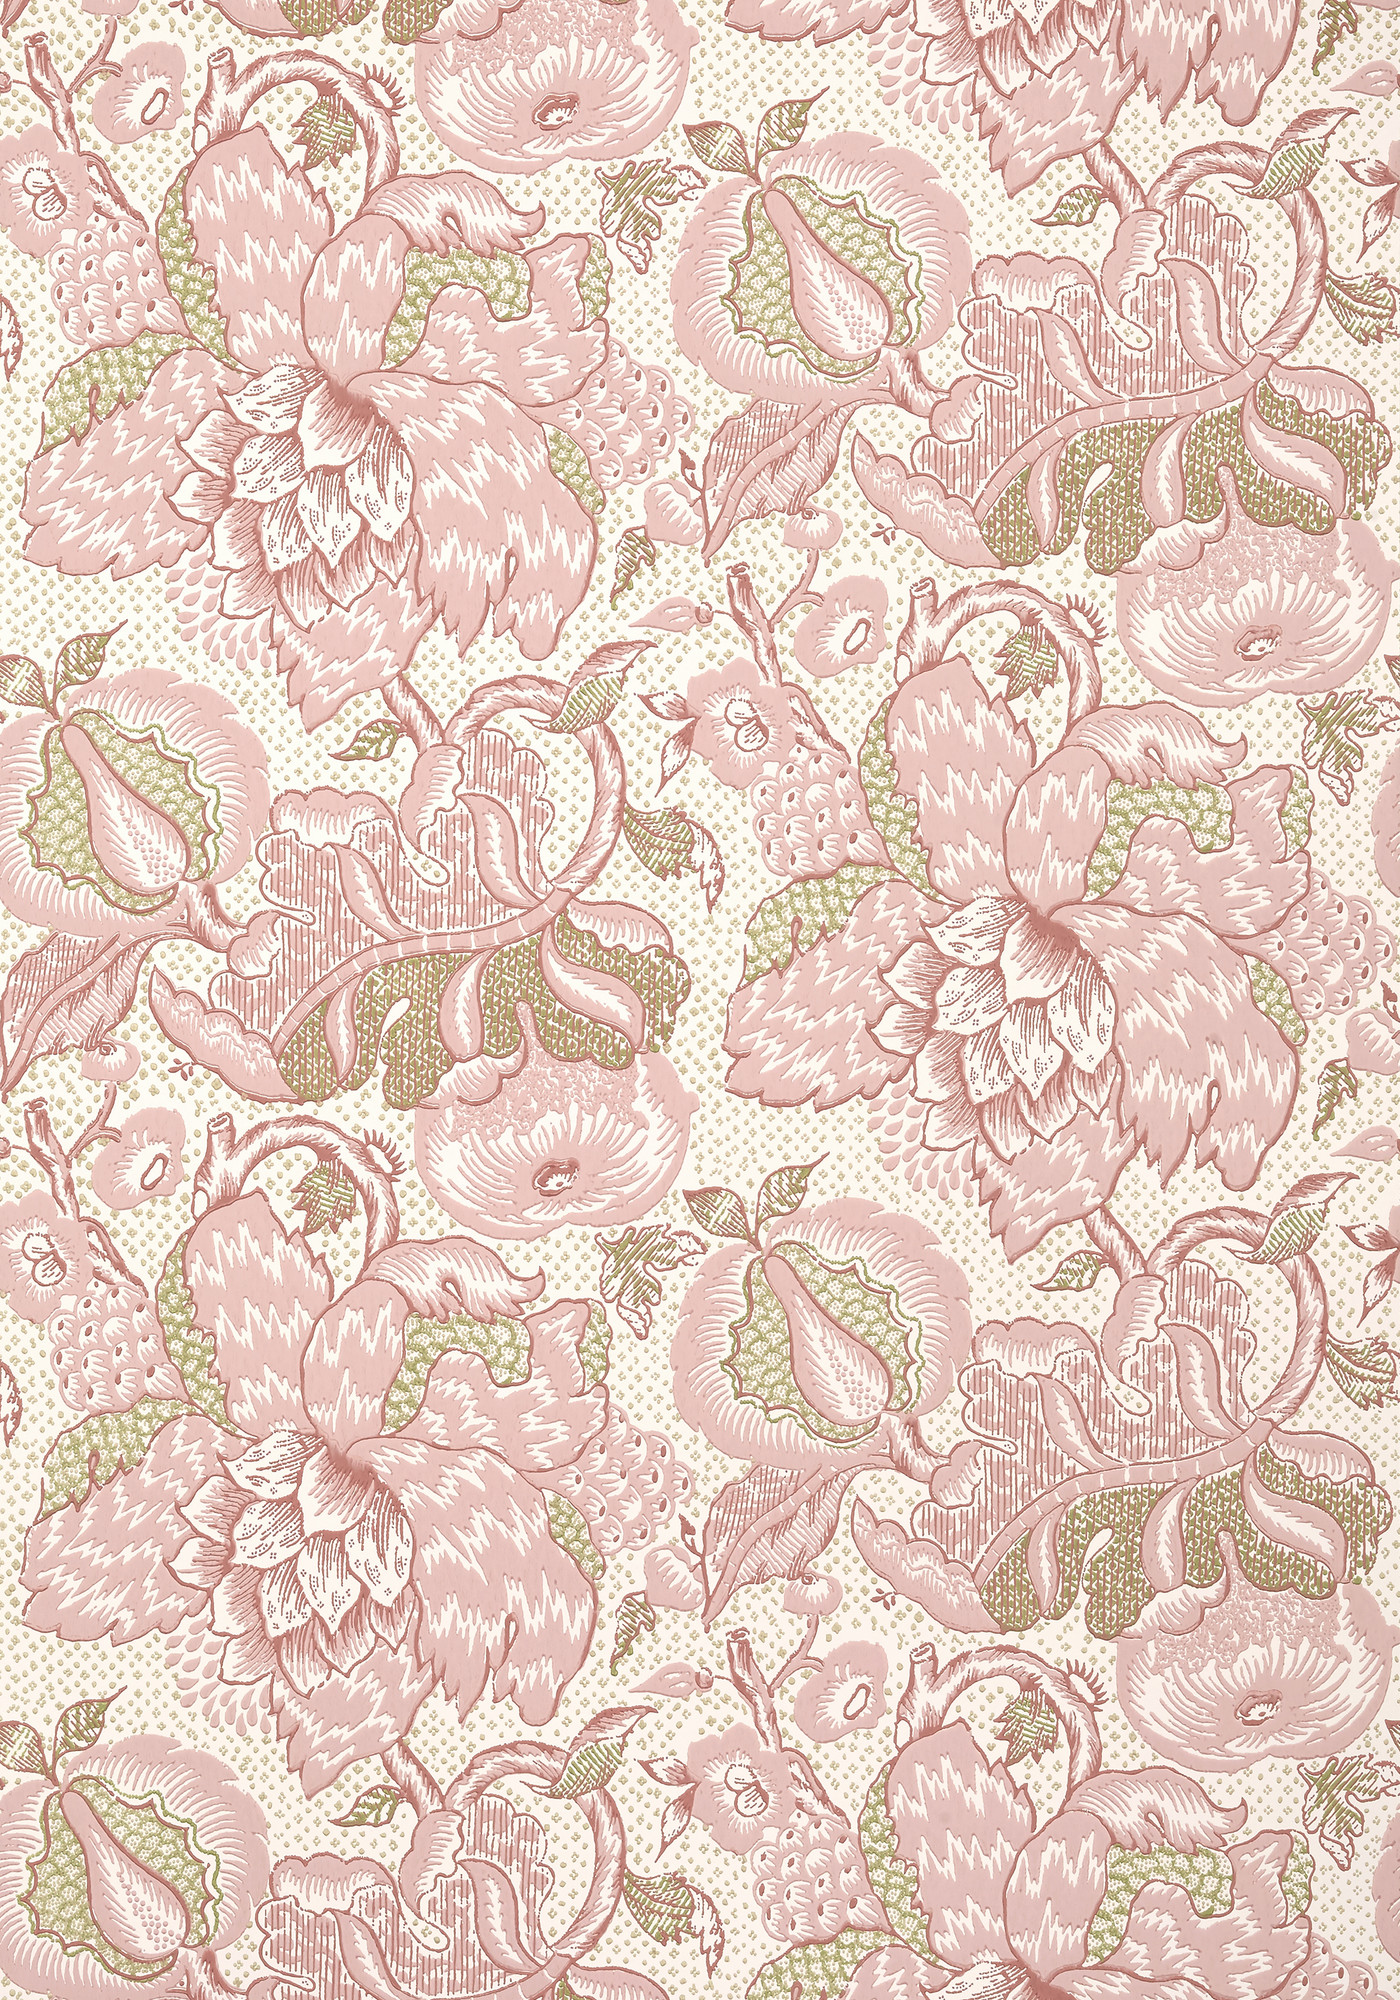 Blush Pink Large Scale Floral Botanical Wallpaper | Anna French Westmont